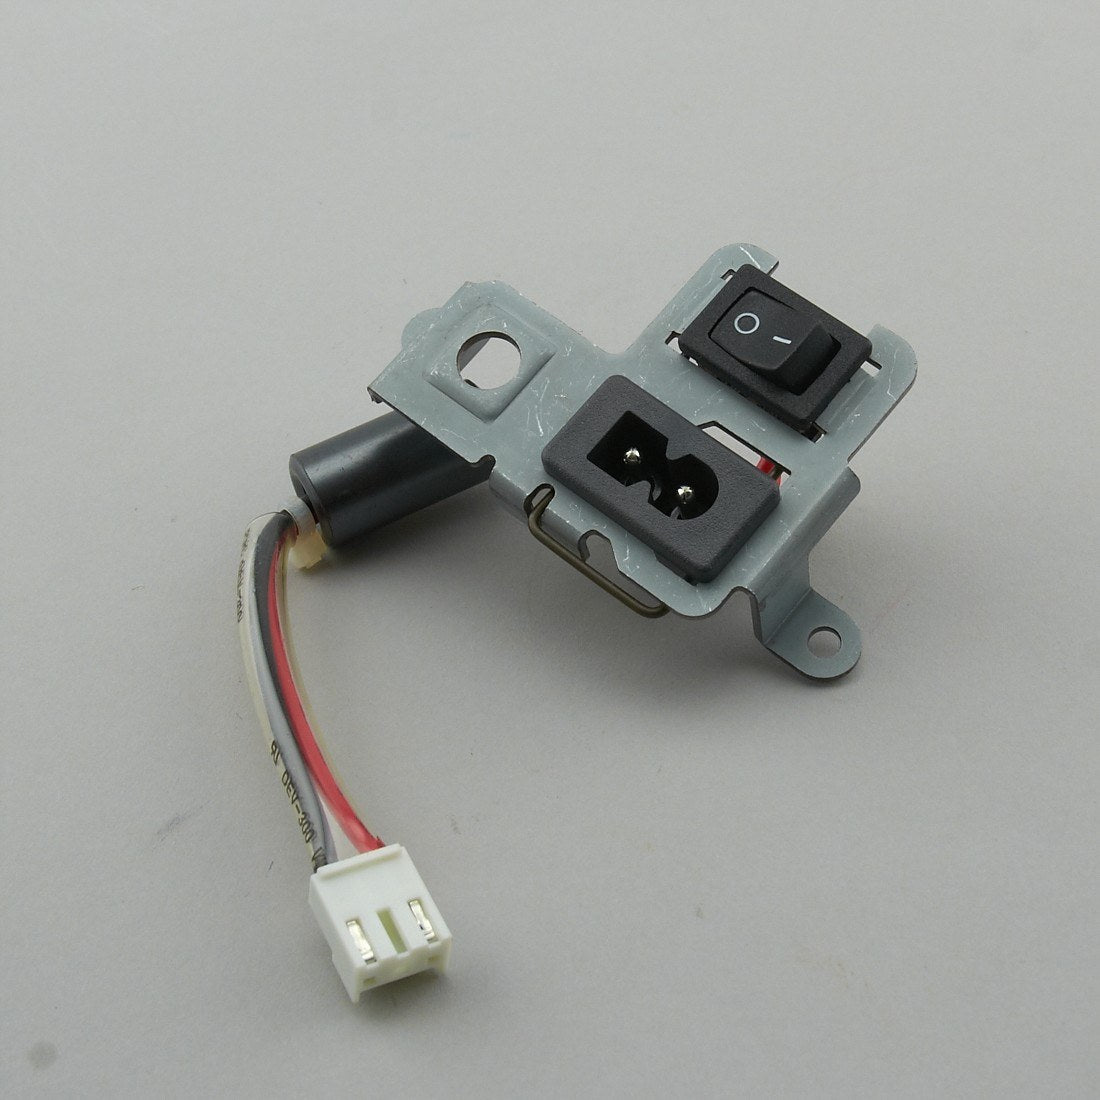 Switch Holder Assembly, Babylock, Brother #XA6055151 image # 38158